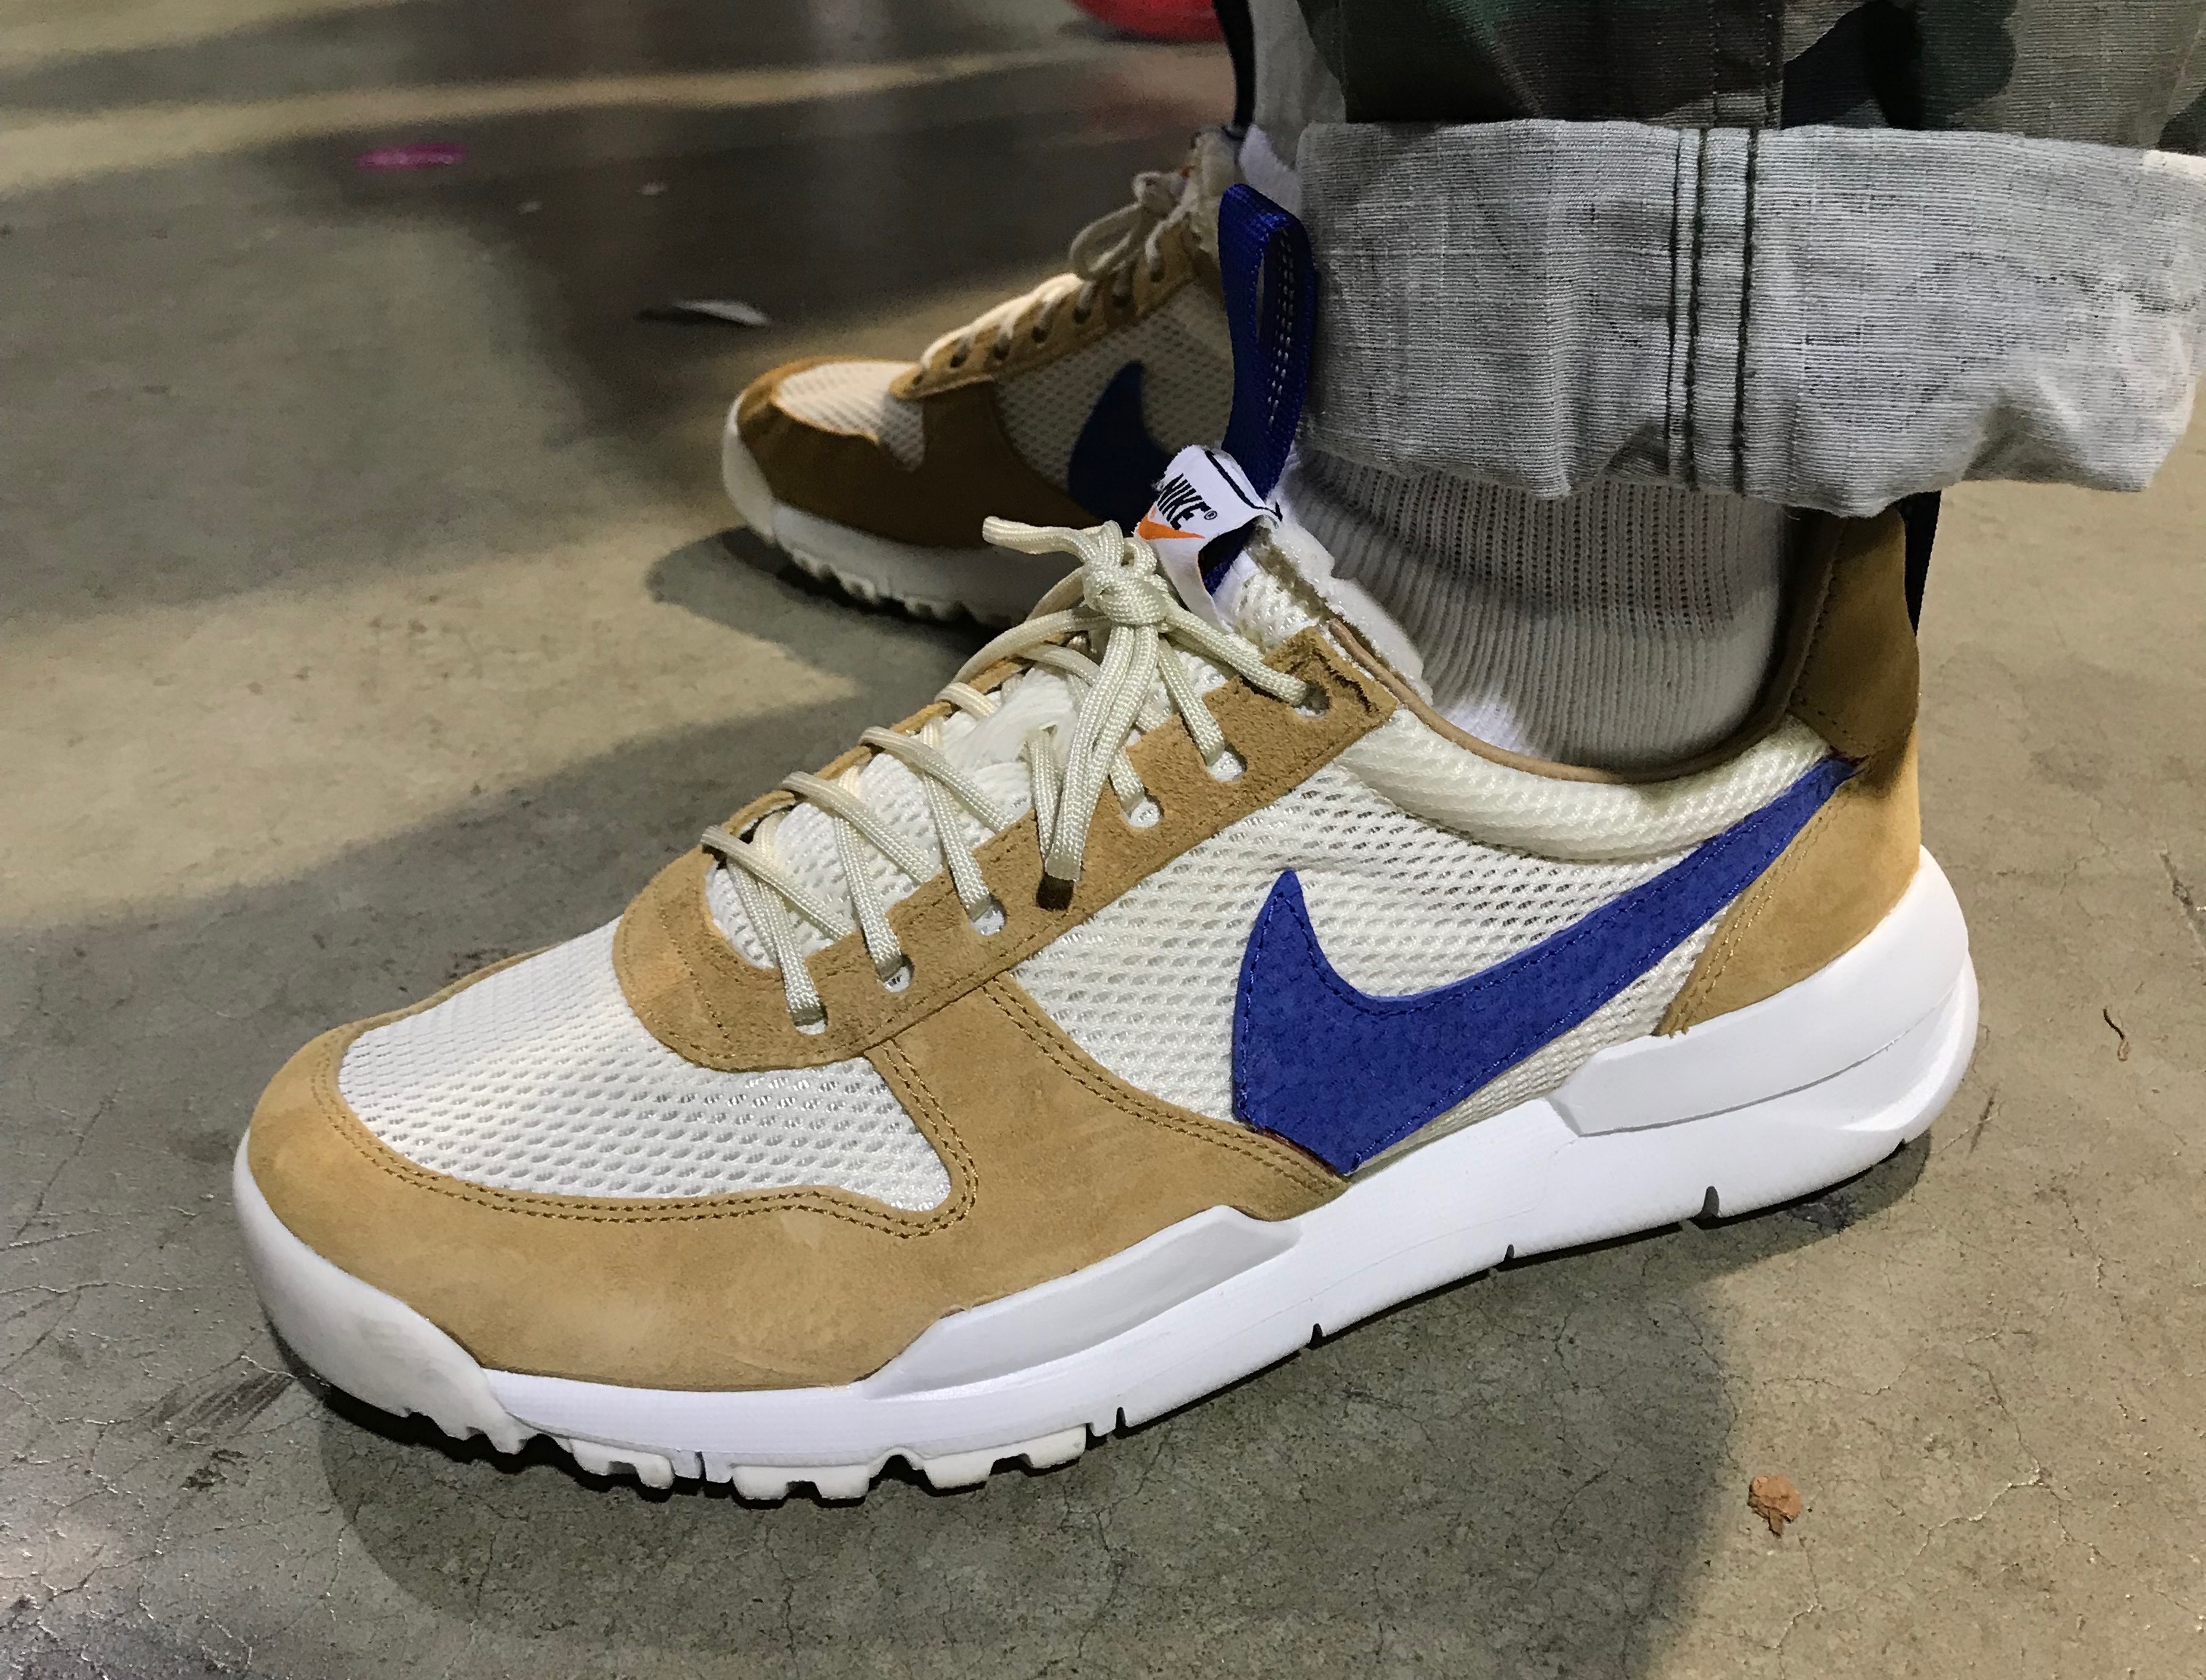 Unreleased Tom Sachs x Nikes Surface | Complex